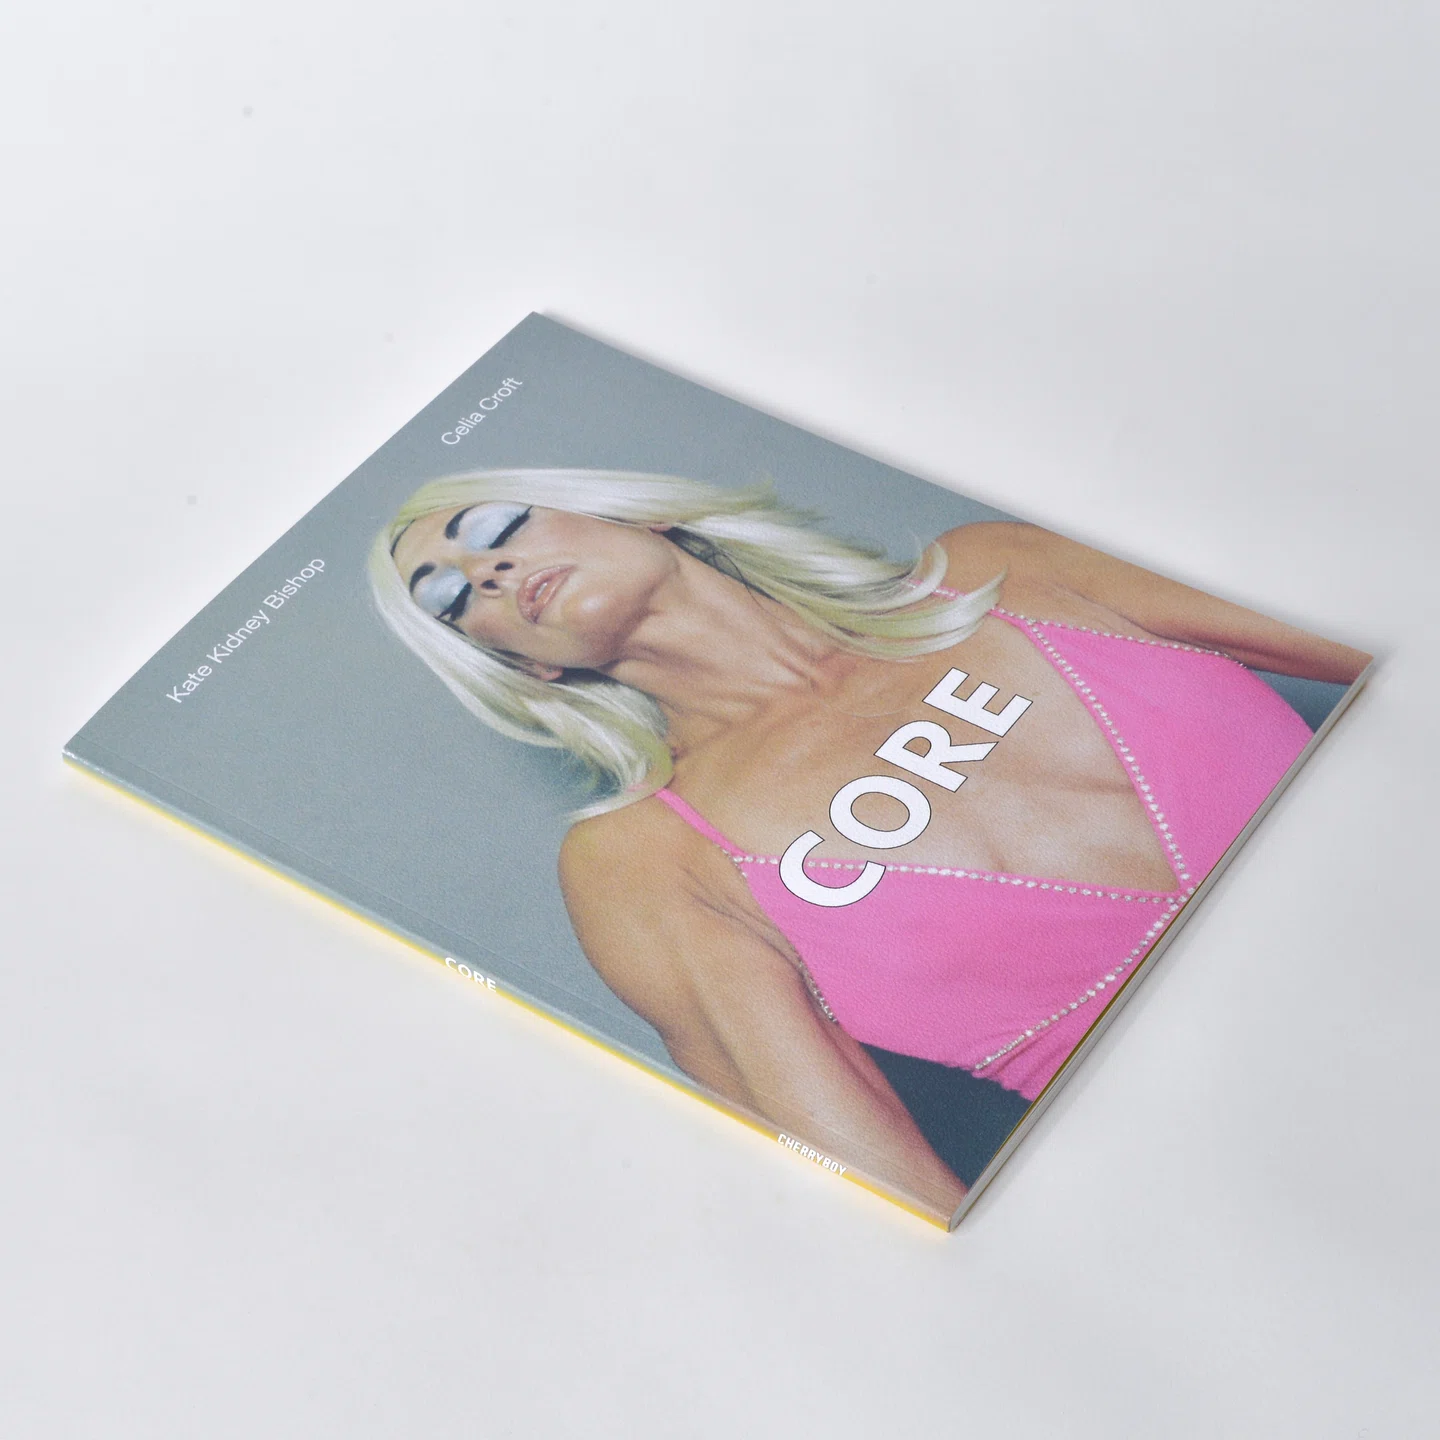 core-cherrybody-photography-publication-itsnicethat-08.jpg